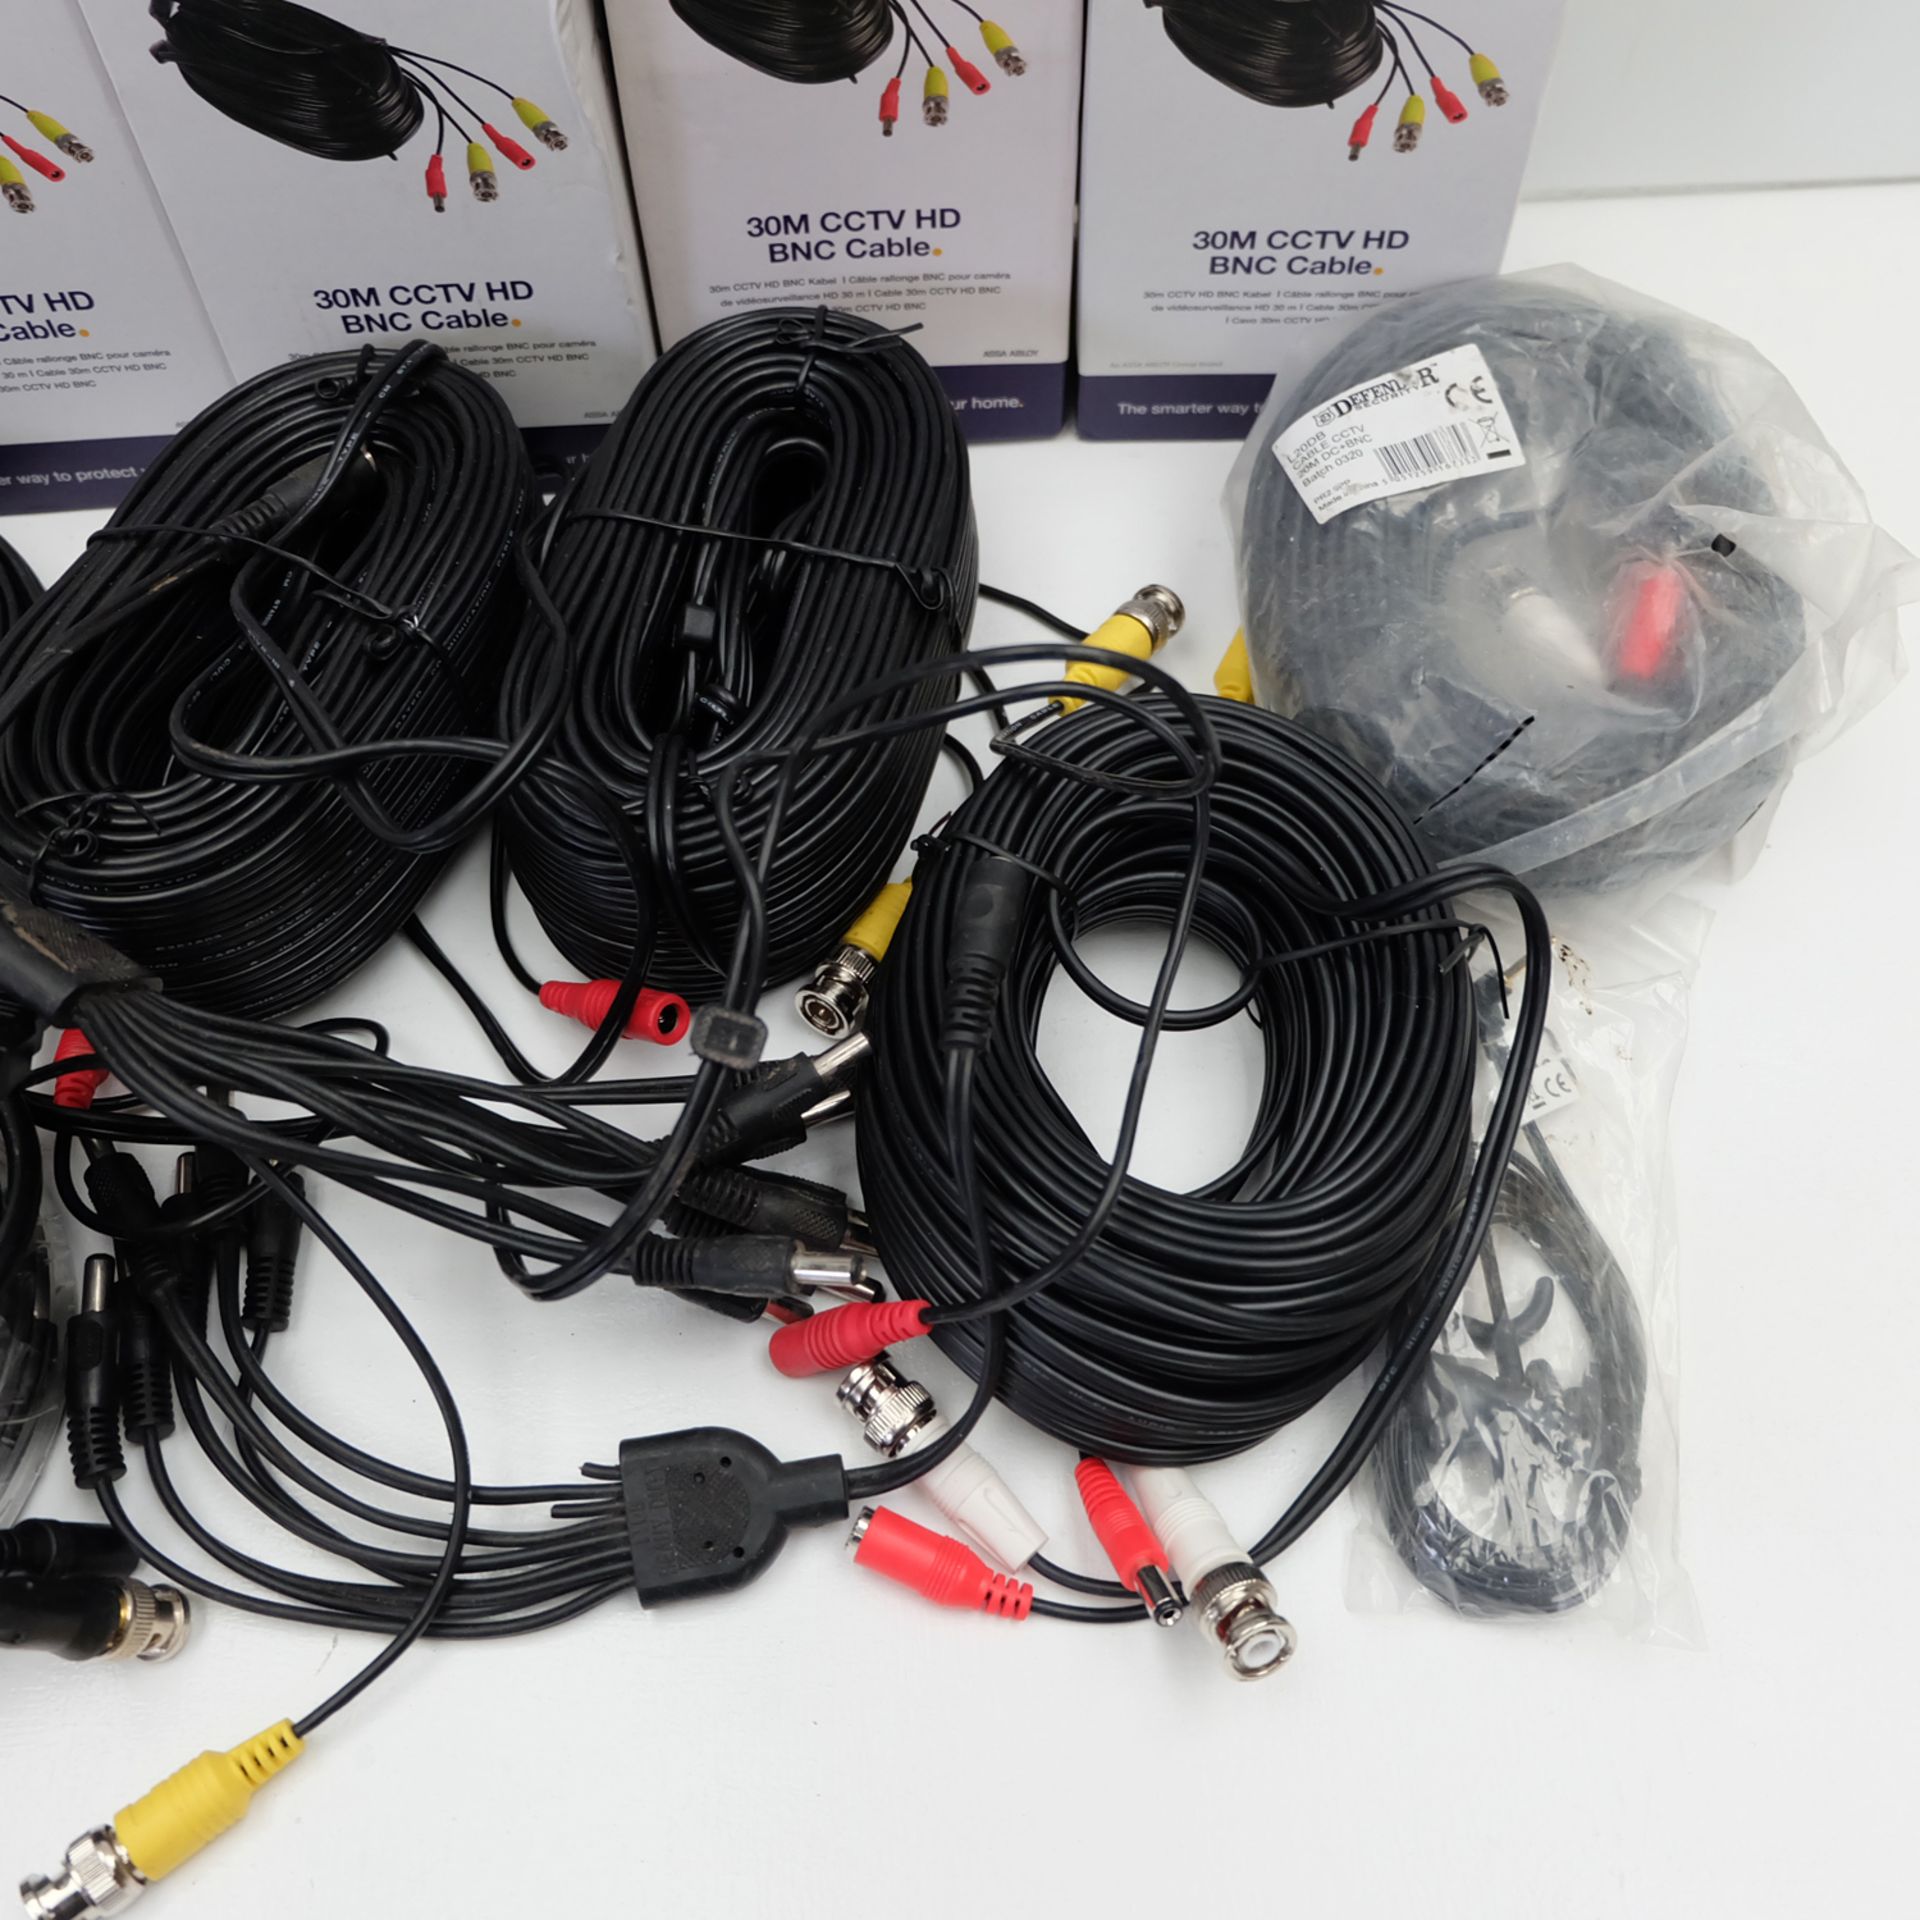 CCTV Extension Wires and Adaptors. - Image 3 of 5